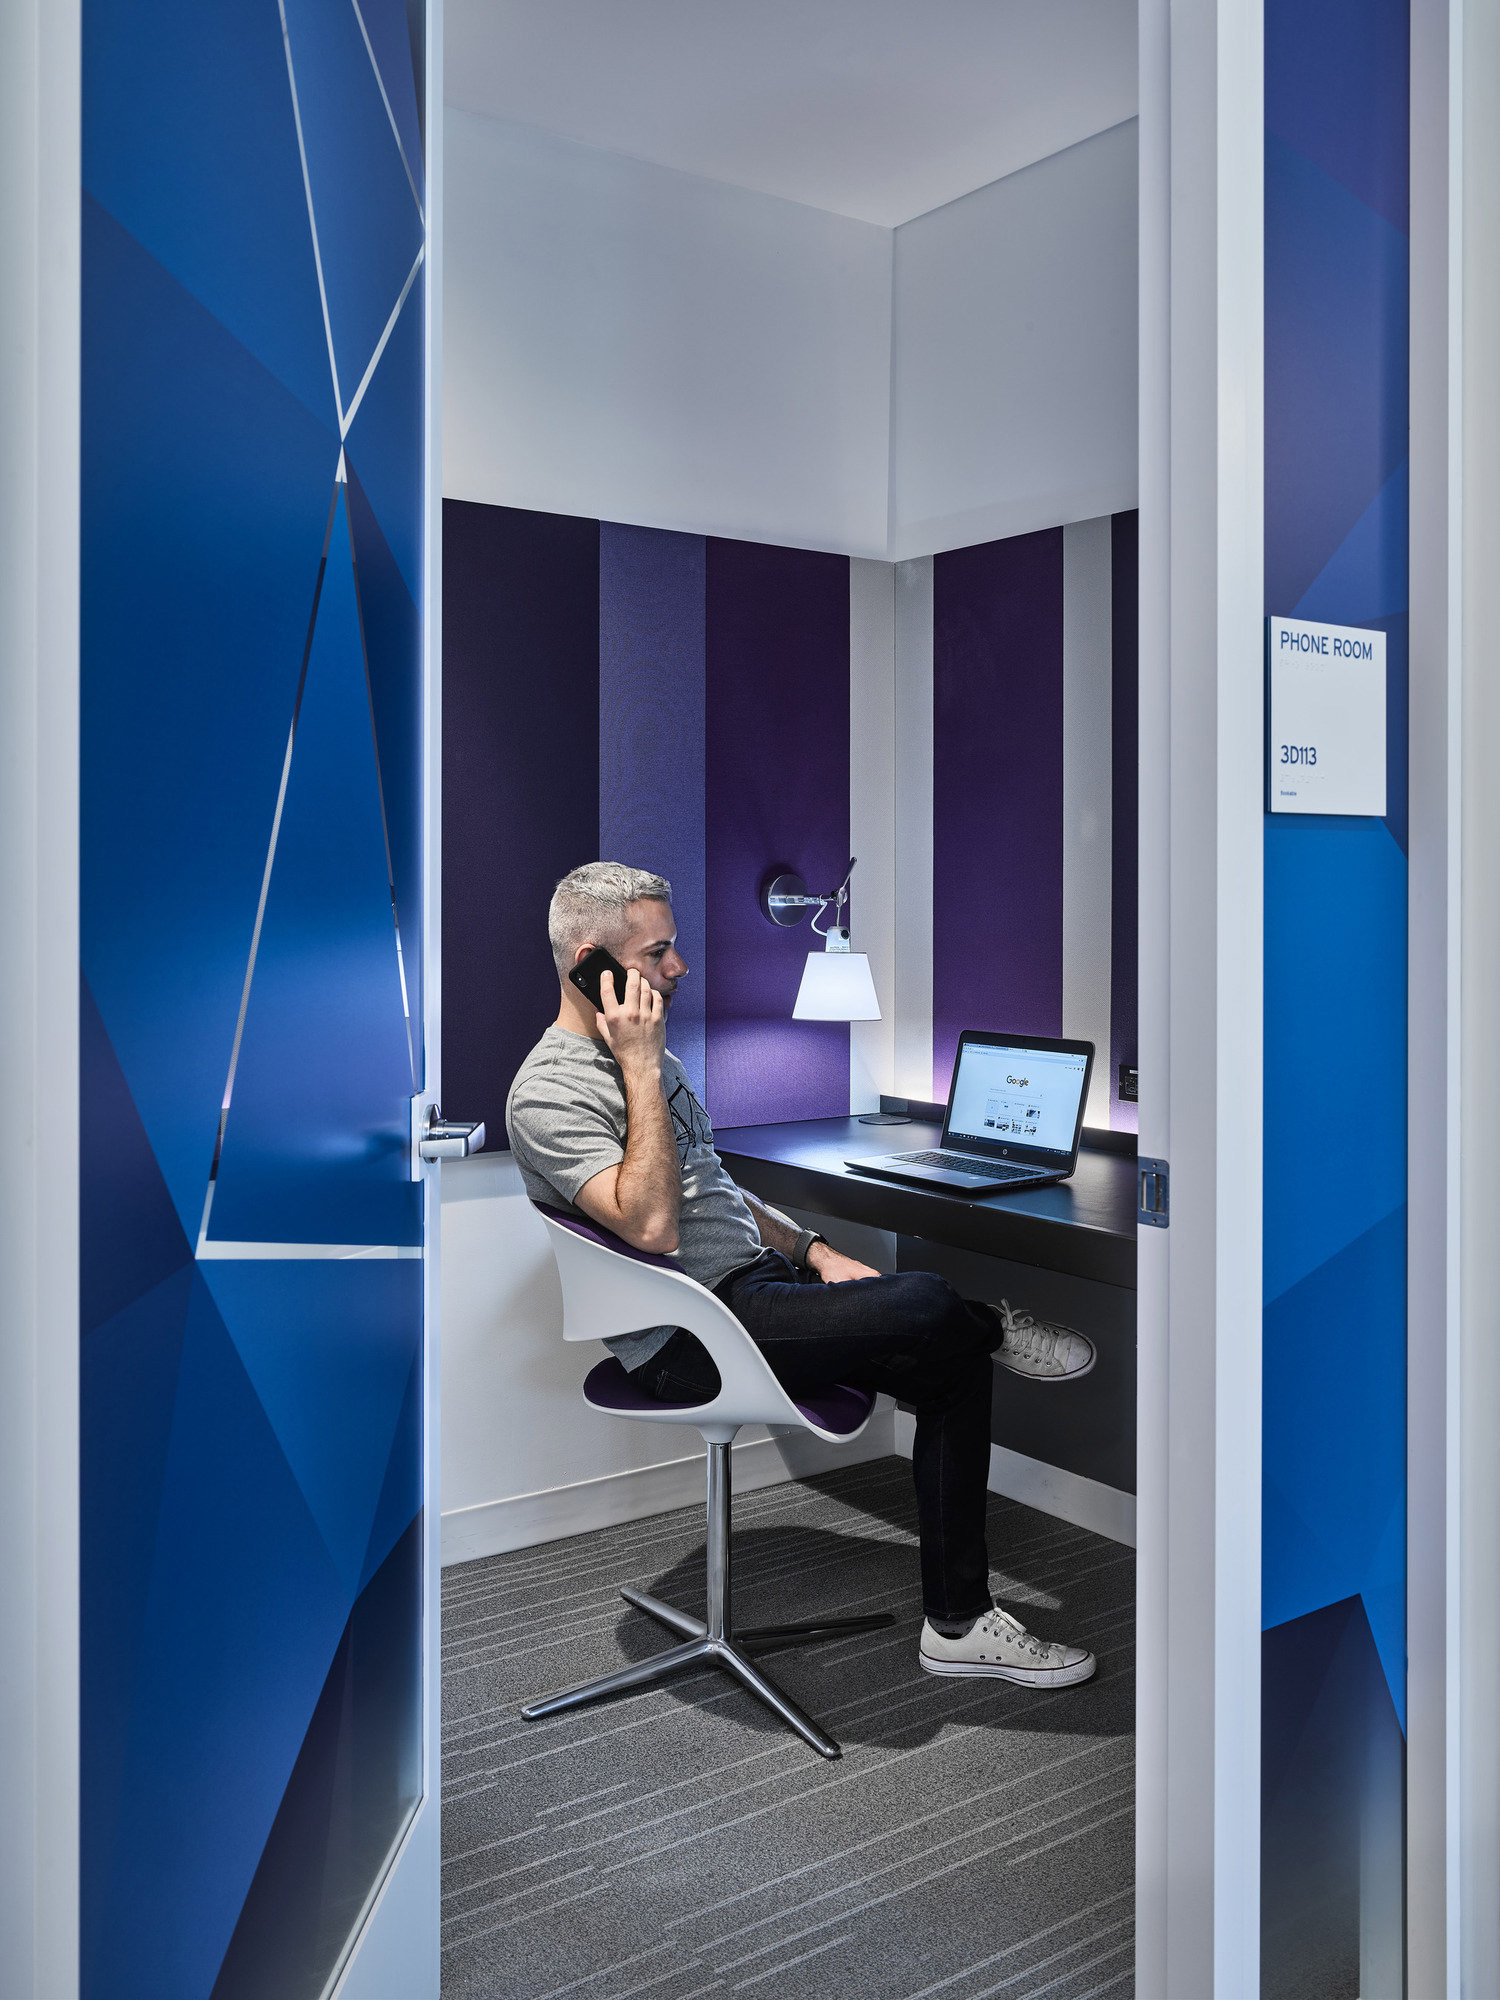 A compact office phone booth with geometric blue and white acoustic panels, featuring a built-in white desk with a mounted lamp and a man engaged in conversation on his mobile phone.